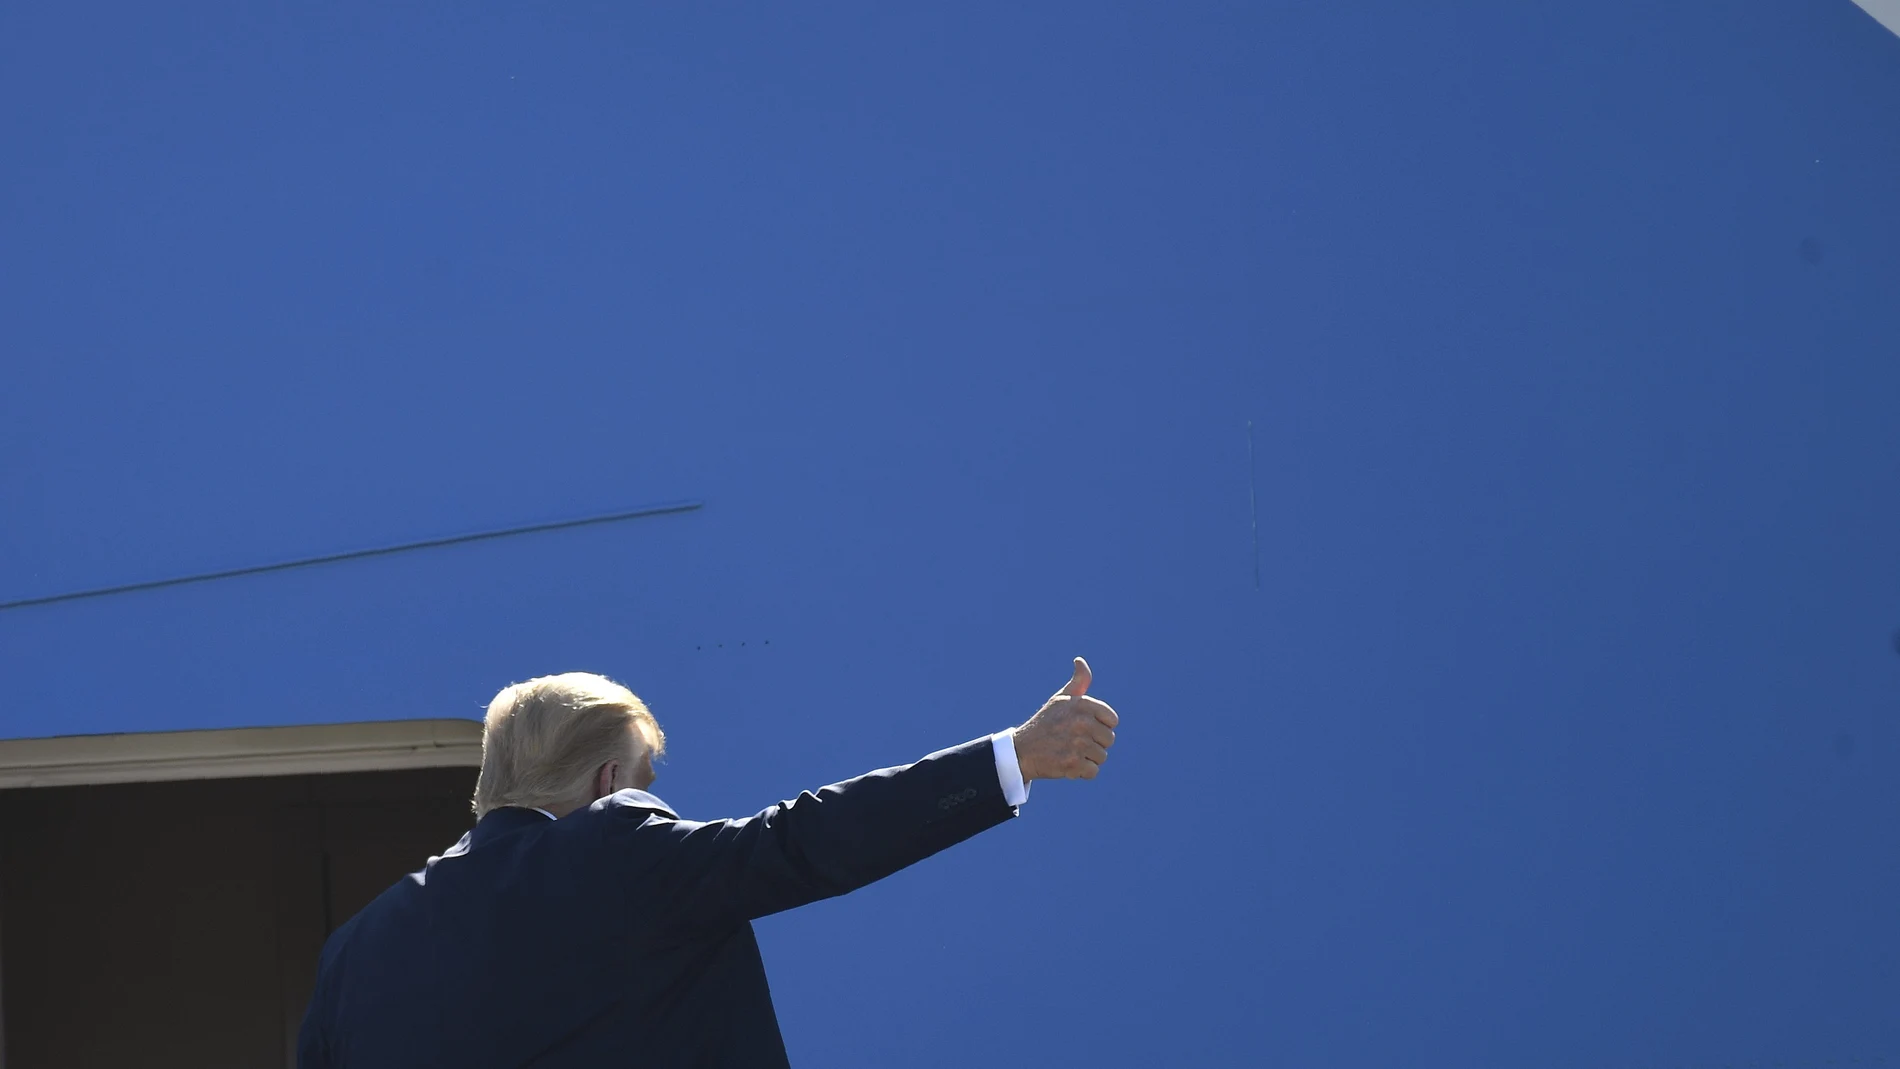 President Donald Trump gestures from the top of the steps as he boards Air Force One at Andrews Air Force Base in Md., Wednesday, July 29, 2020. Trump is heading to Texas and will shift focus to American energy dominance during a stop that will include his first visit to an oil rig. (AP Photo/Susan Walsh)